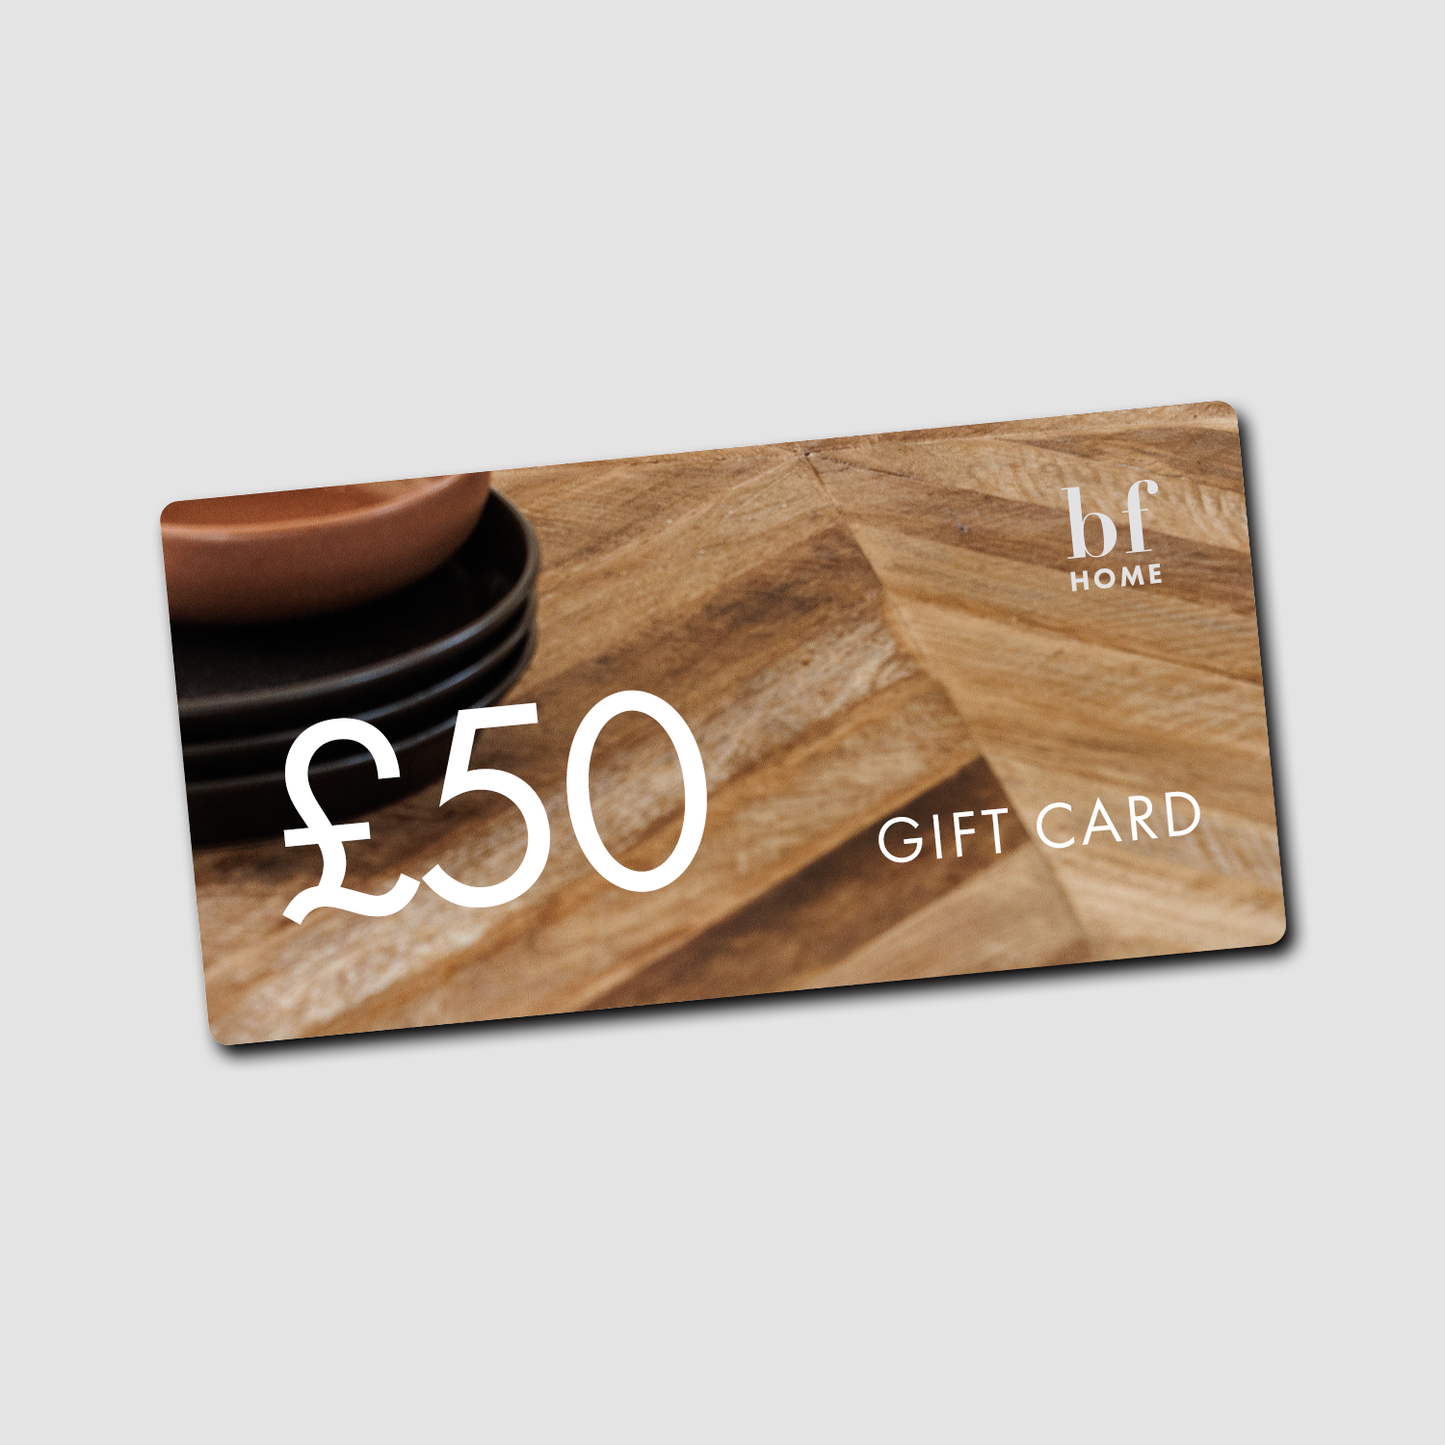 BF Home Gift Card £10